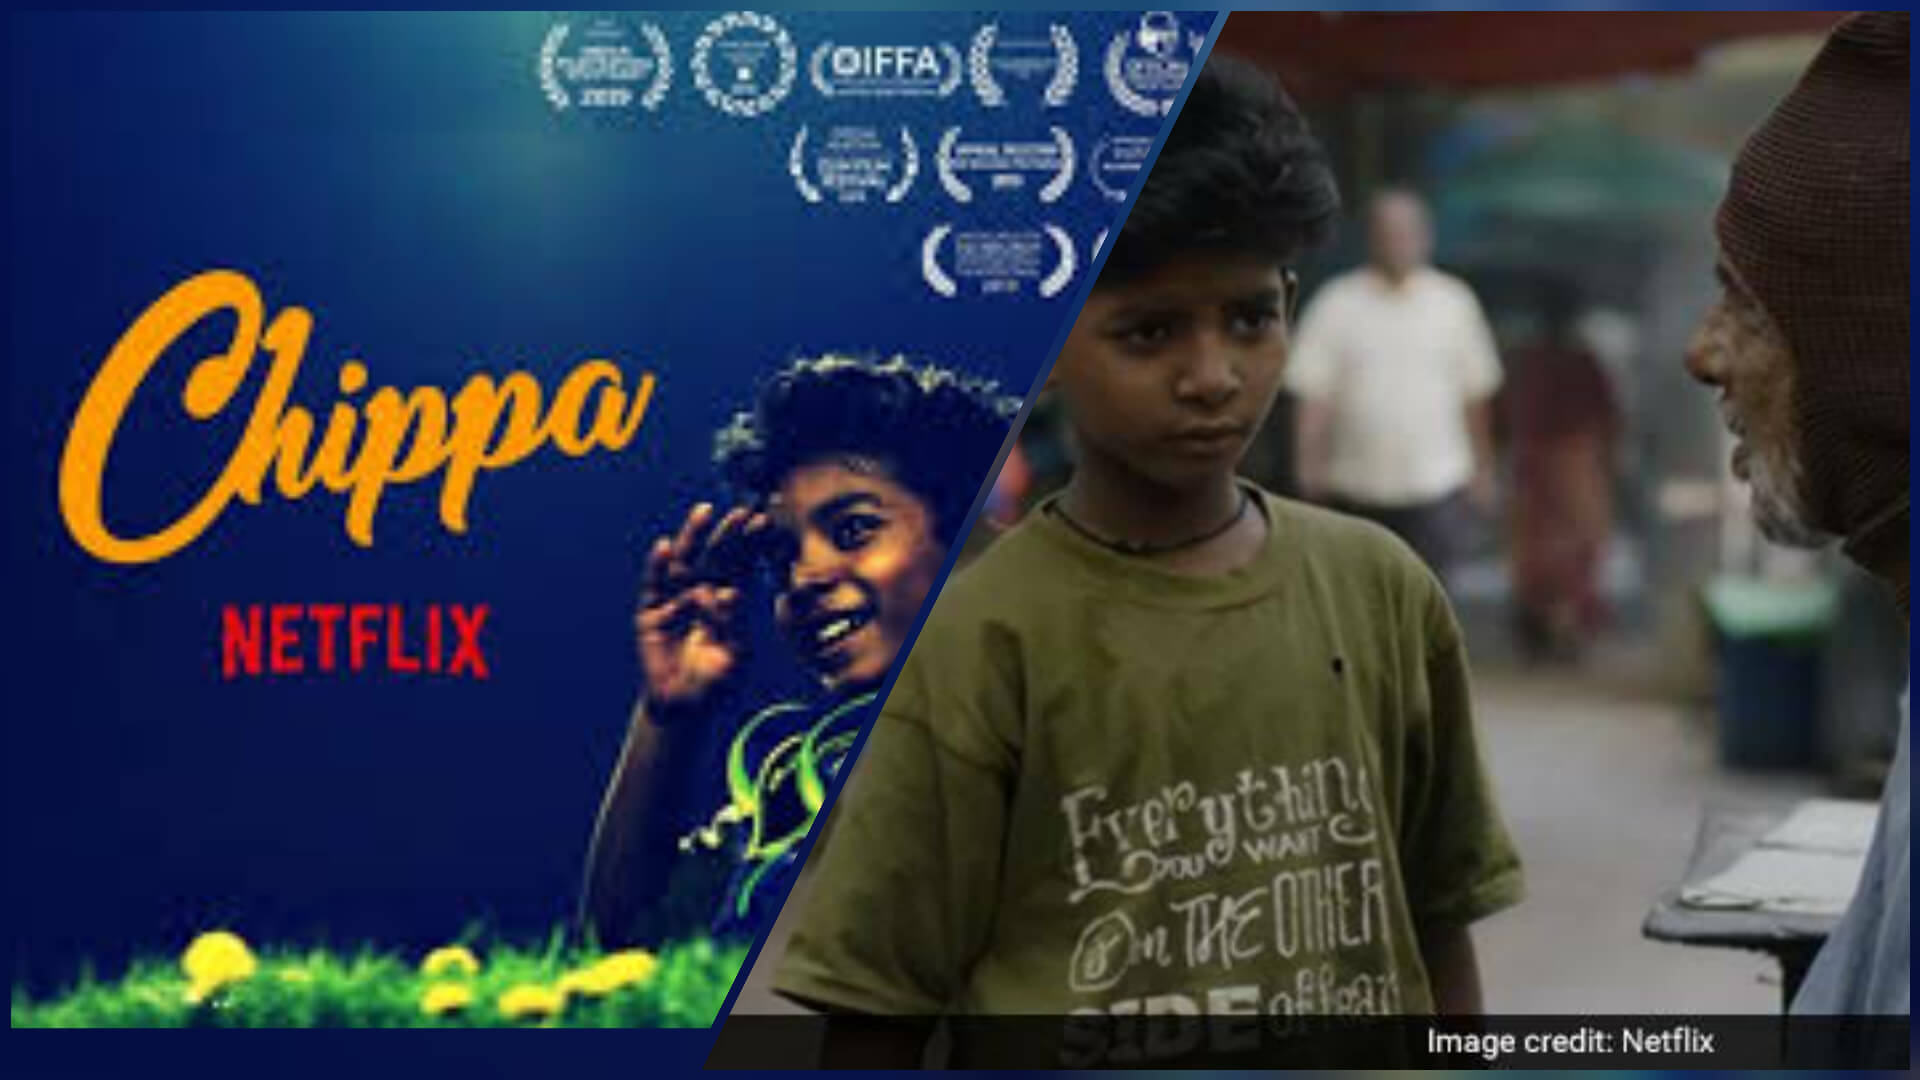 Chhipa-7 children’s movies to keep your child engaged & happy-live love laugh